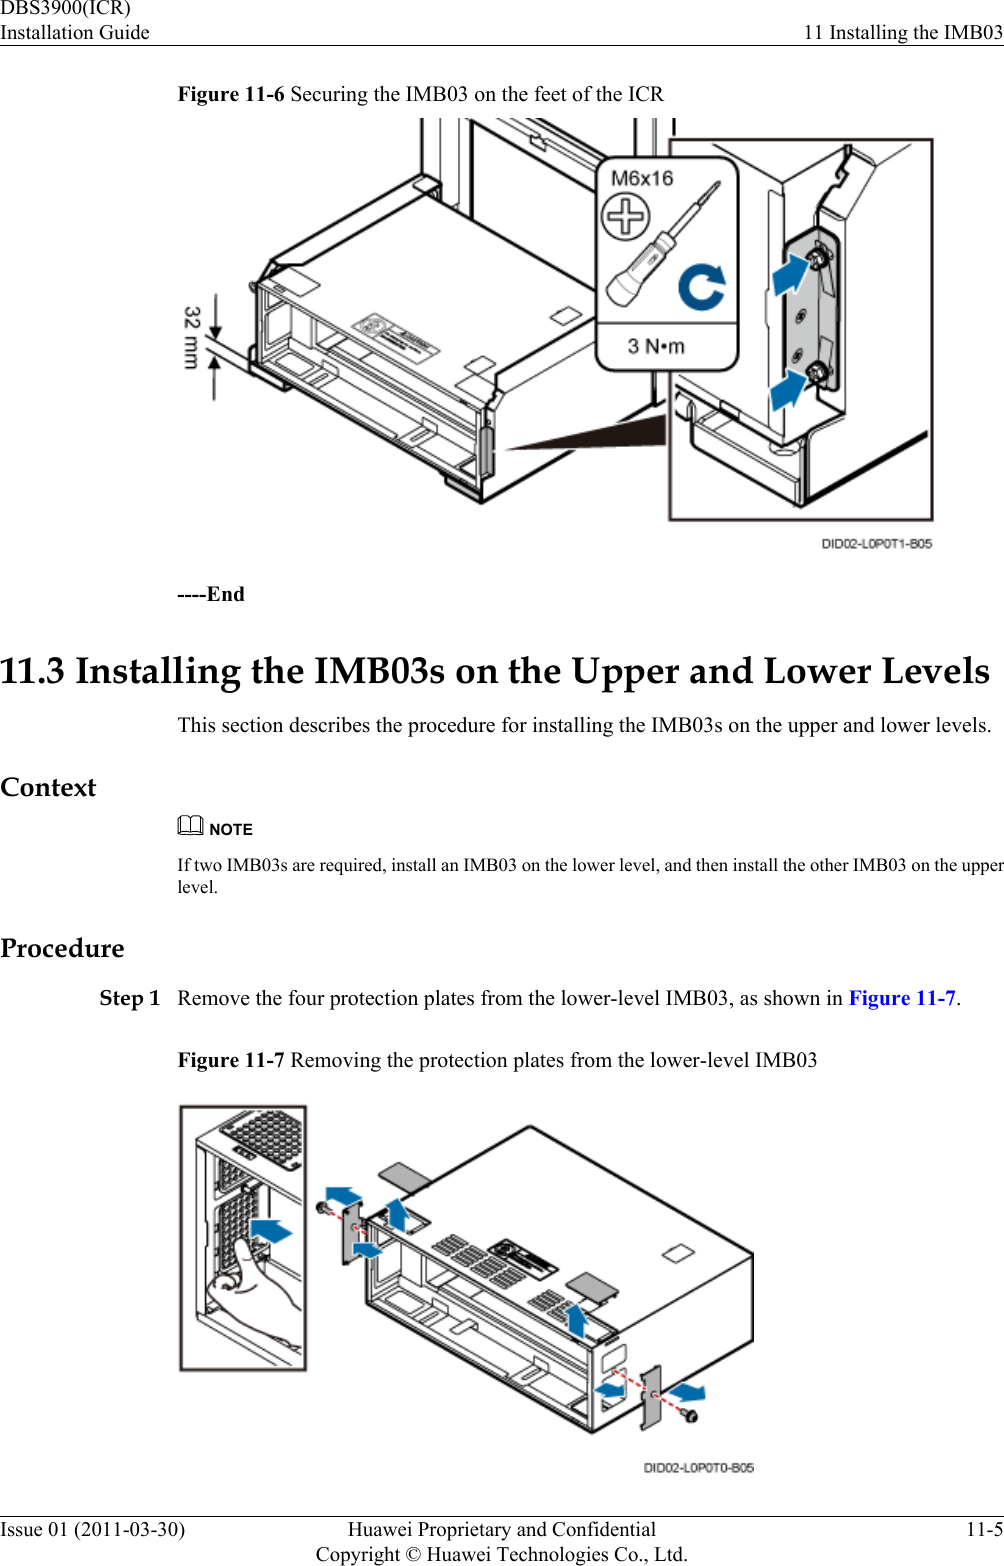 Figure 11-6 Securing the IMB03 on the feet of the ICR----End11.3 Installing the IMB03s on the Upper and Lower LevelsThis section describes the procedure for installing the IMB03s on the upper and lower levels.ContextNOTEIf two IMB03s are required, install an IMB03 on the lower level, and then install the other IMB03 on the upperlevel.ProcedureStep 1 Remove the four protection plates from the lower-level IMB03, as shown in Figure 11-7.Figure 11-7 Removing the protection plates from the lower-level IMB03DBS3900(ICR)Installation Guide 11 Installing the IMB03Issue 01 (2011-03-30) Huawei Proprietary and ConfidentialCopyright © Huawei Technologies Co., Ltd.11-5